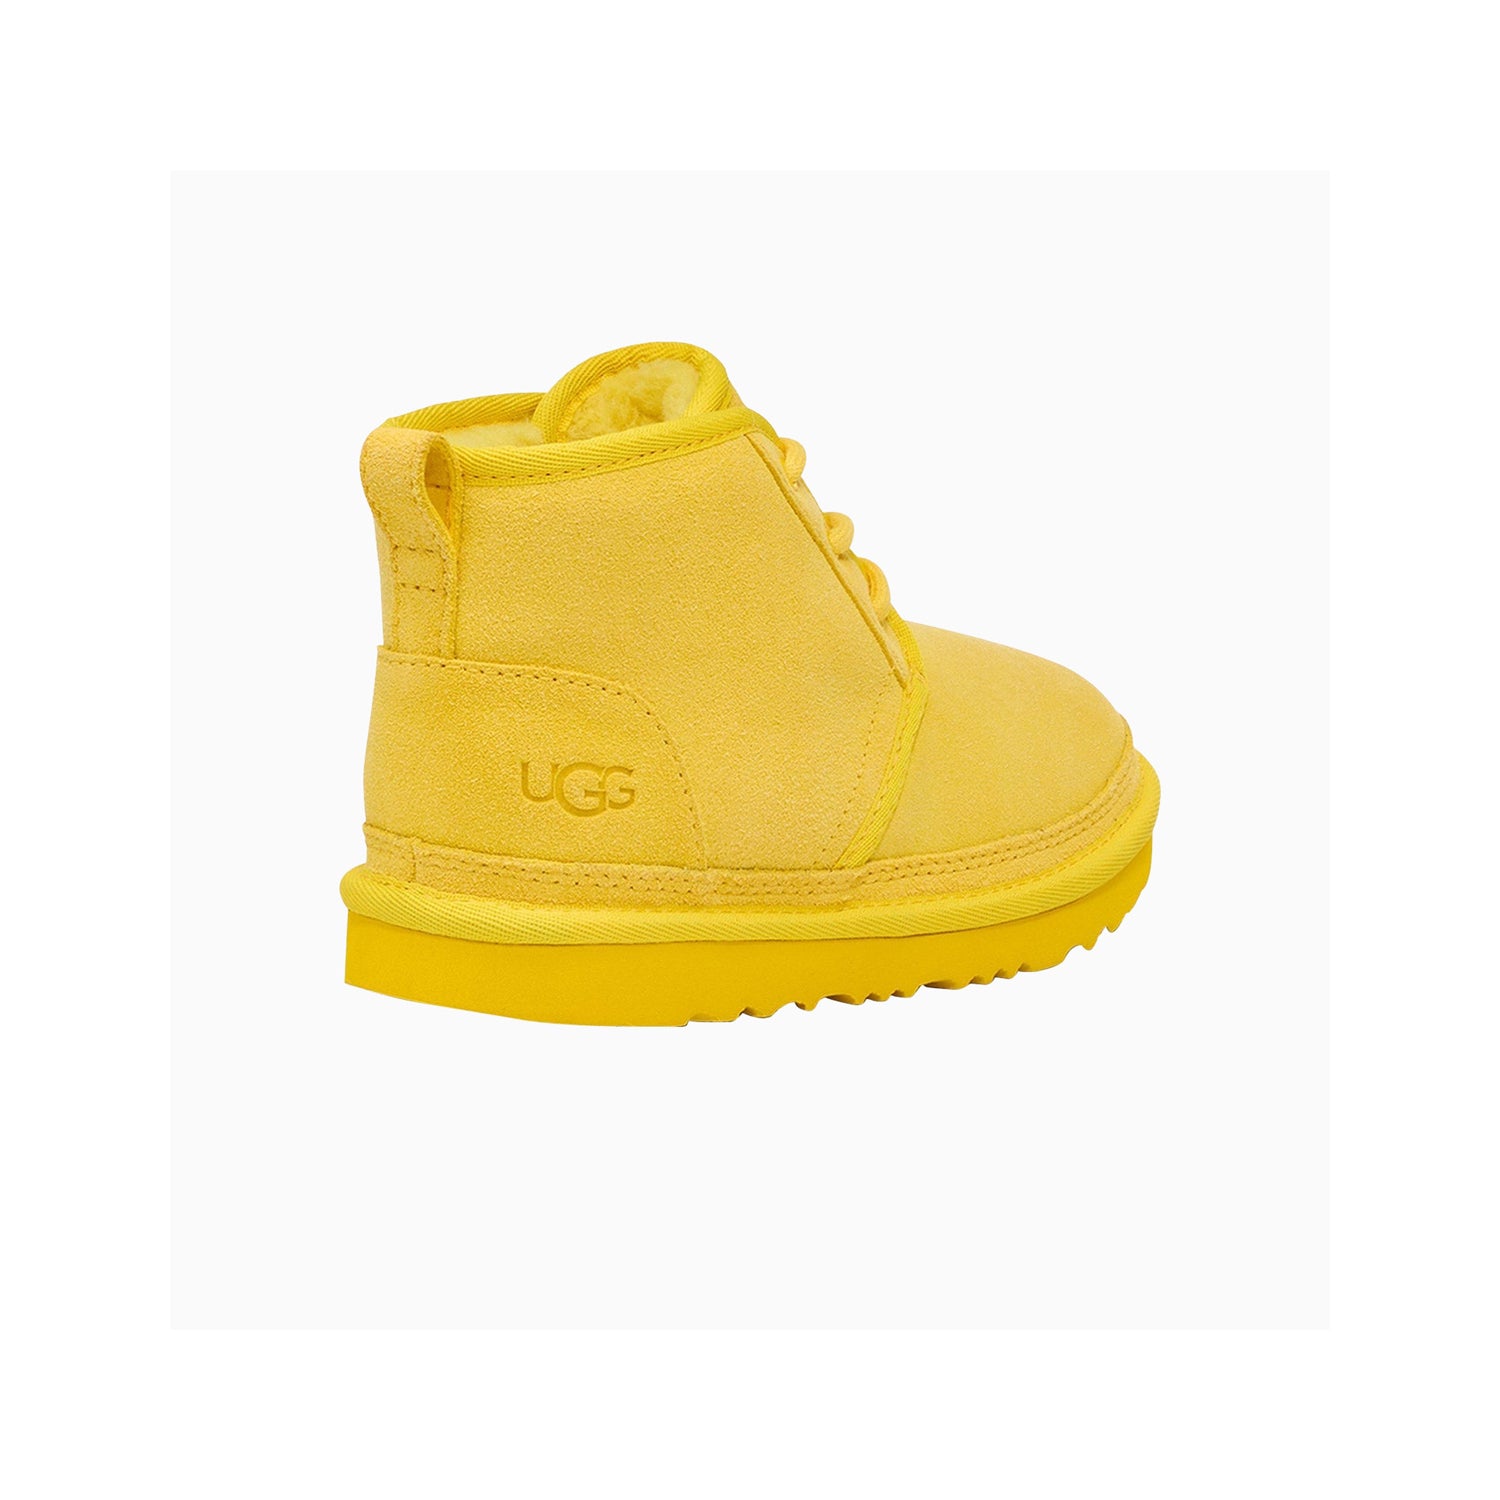 ugg-kids-neumel-ii-boot-1017320k-can-ps